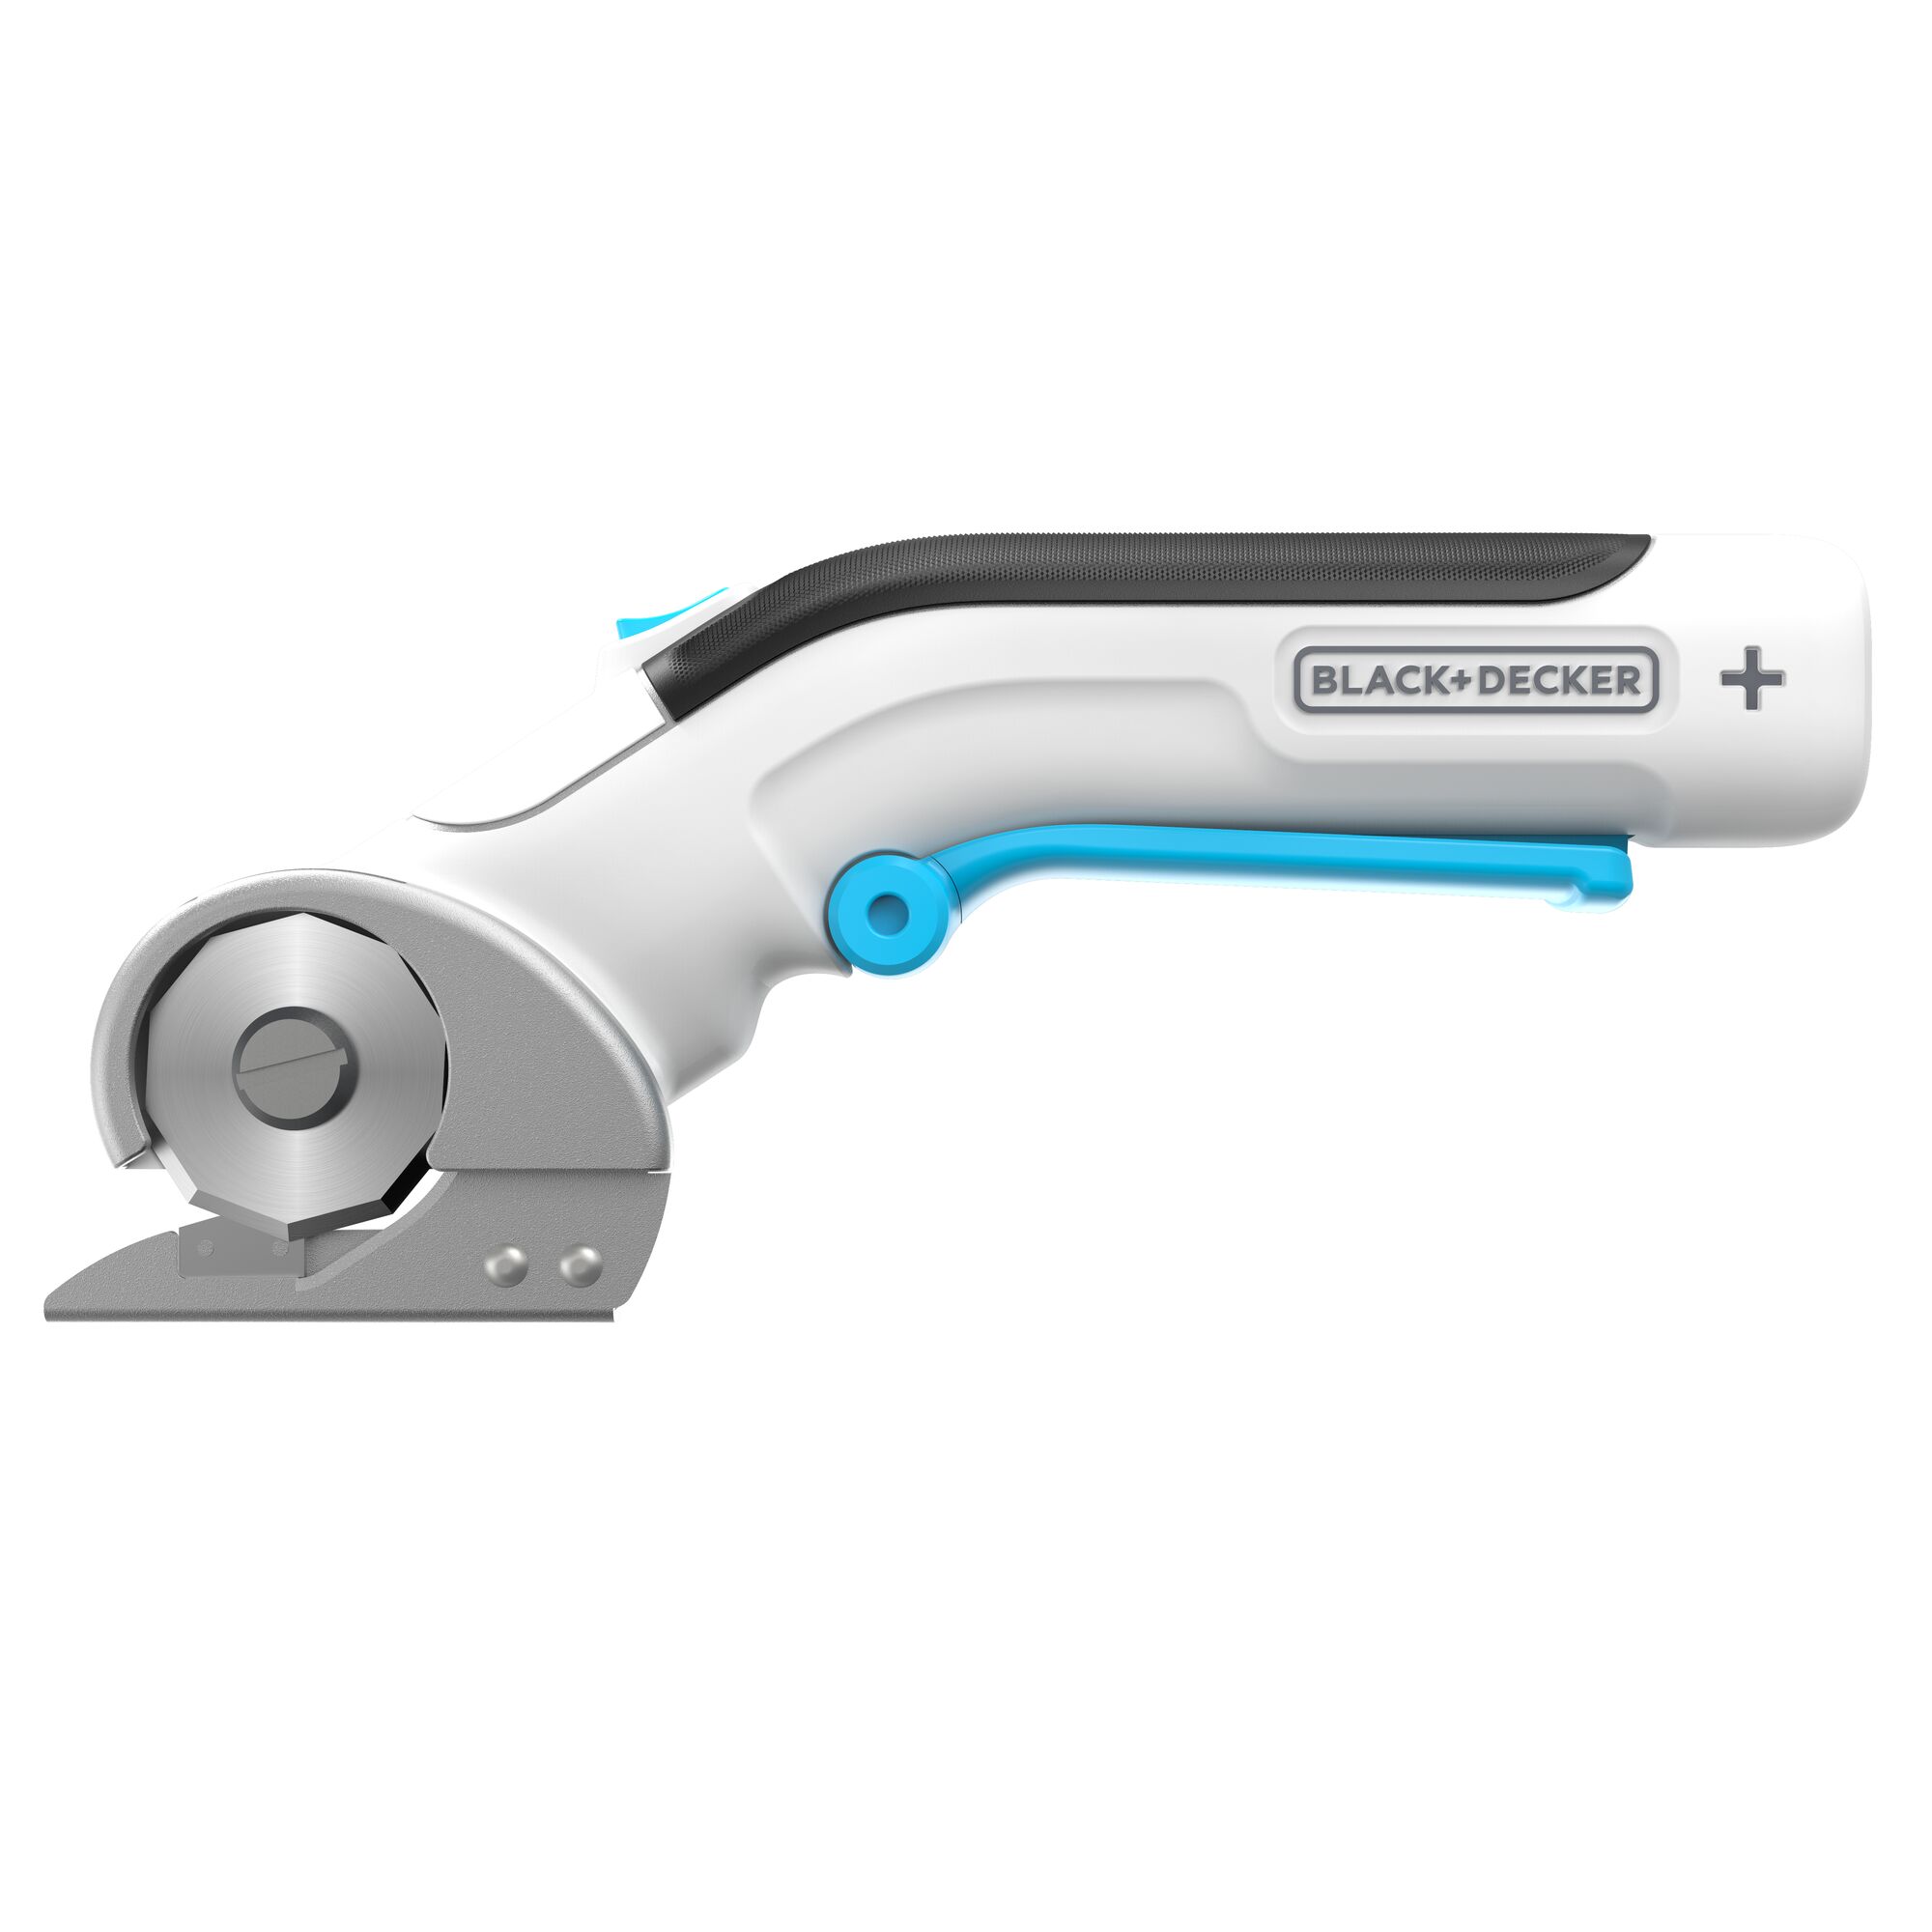 Profile of 4 volt rotary cutter